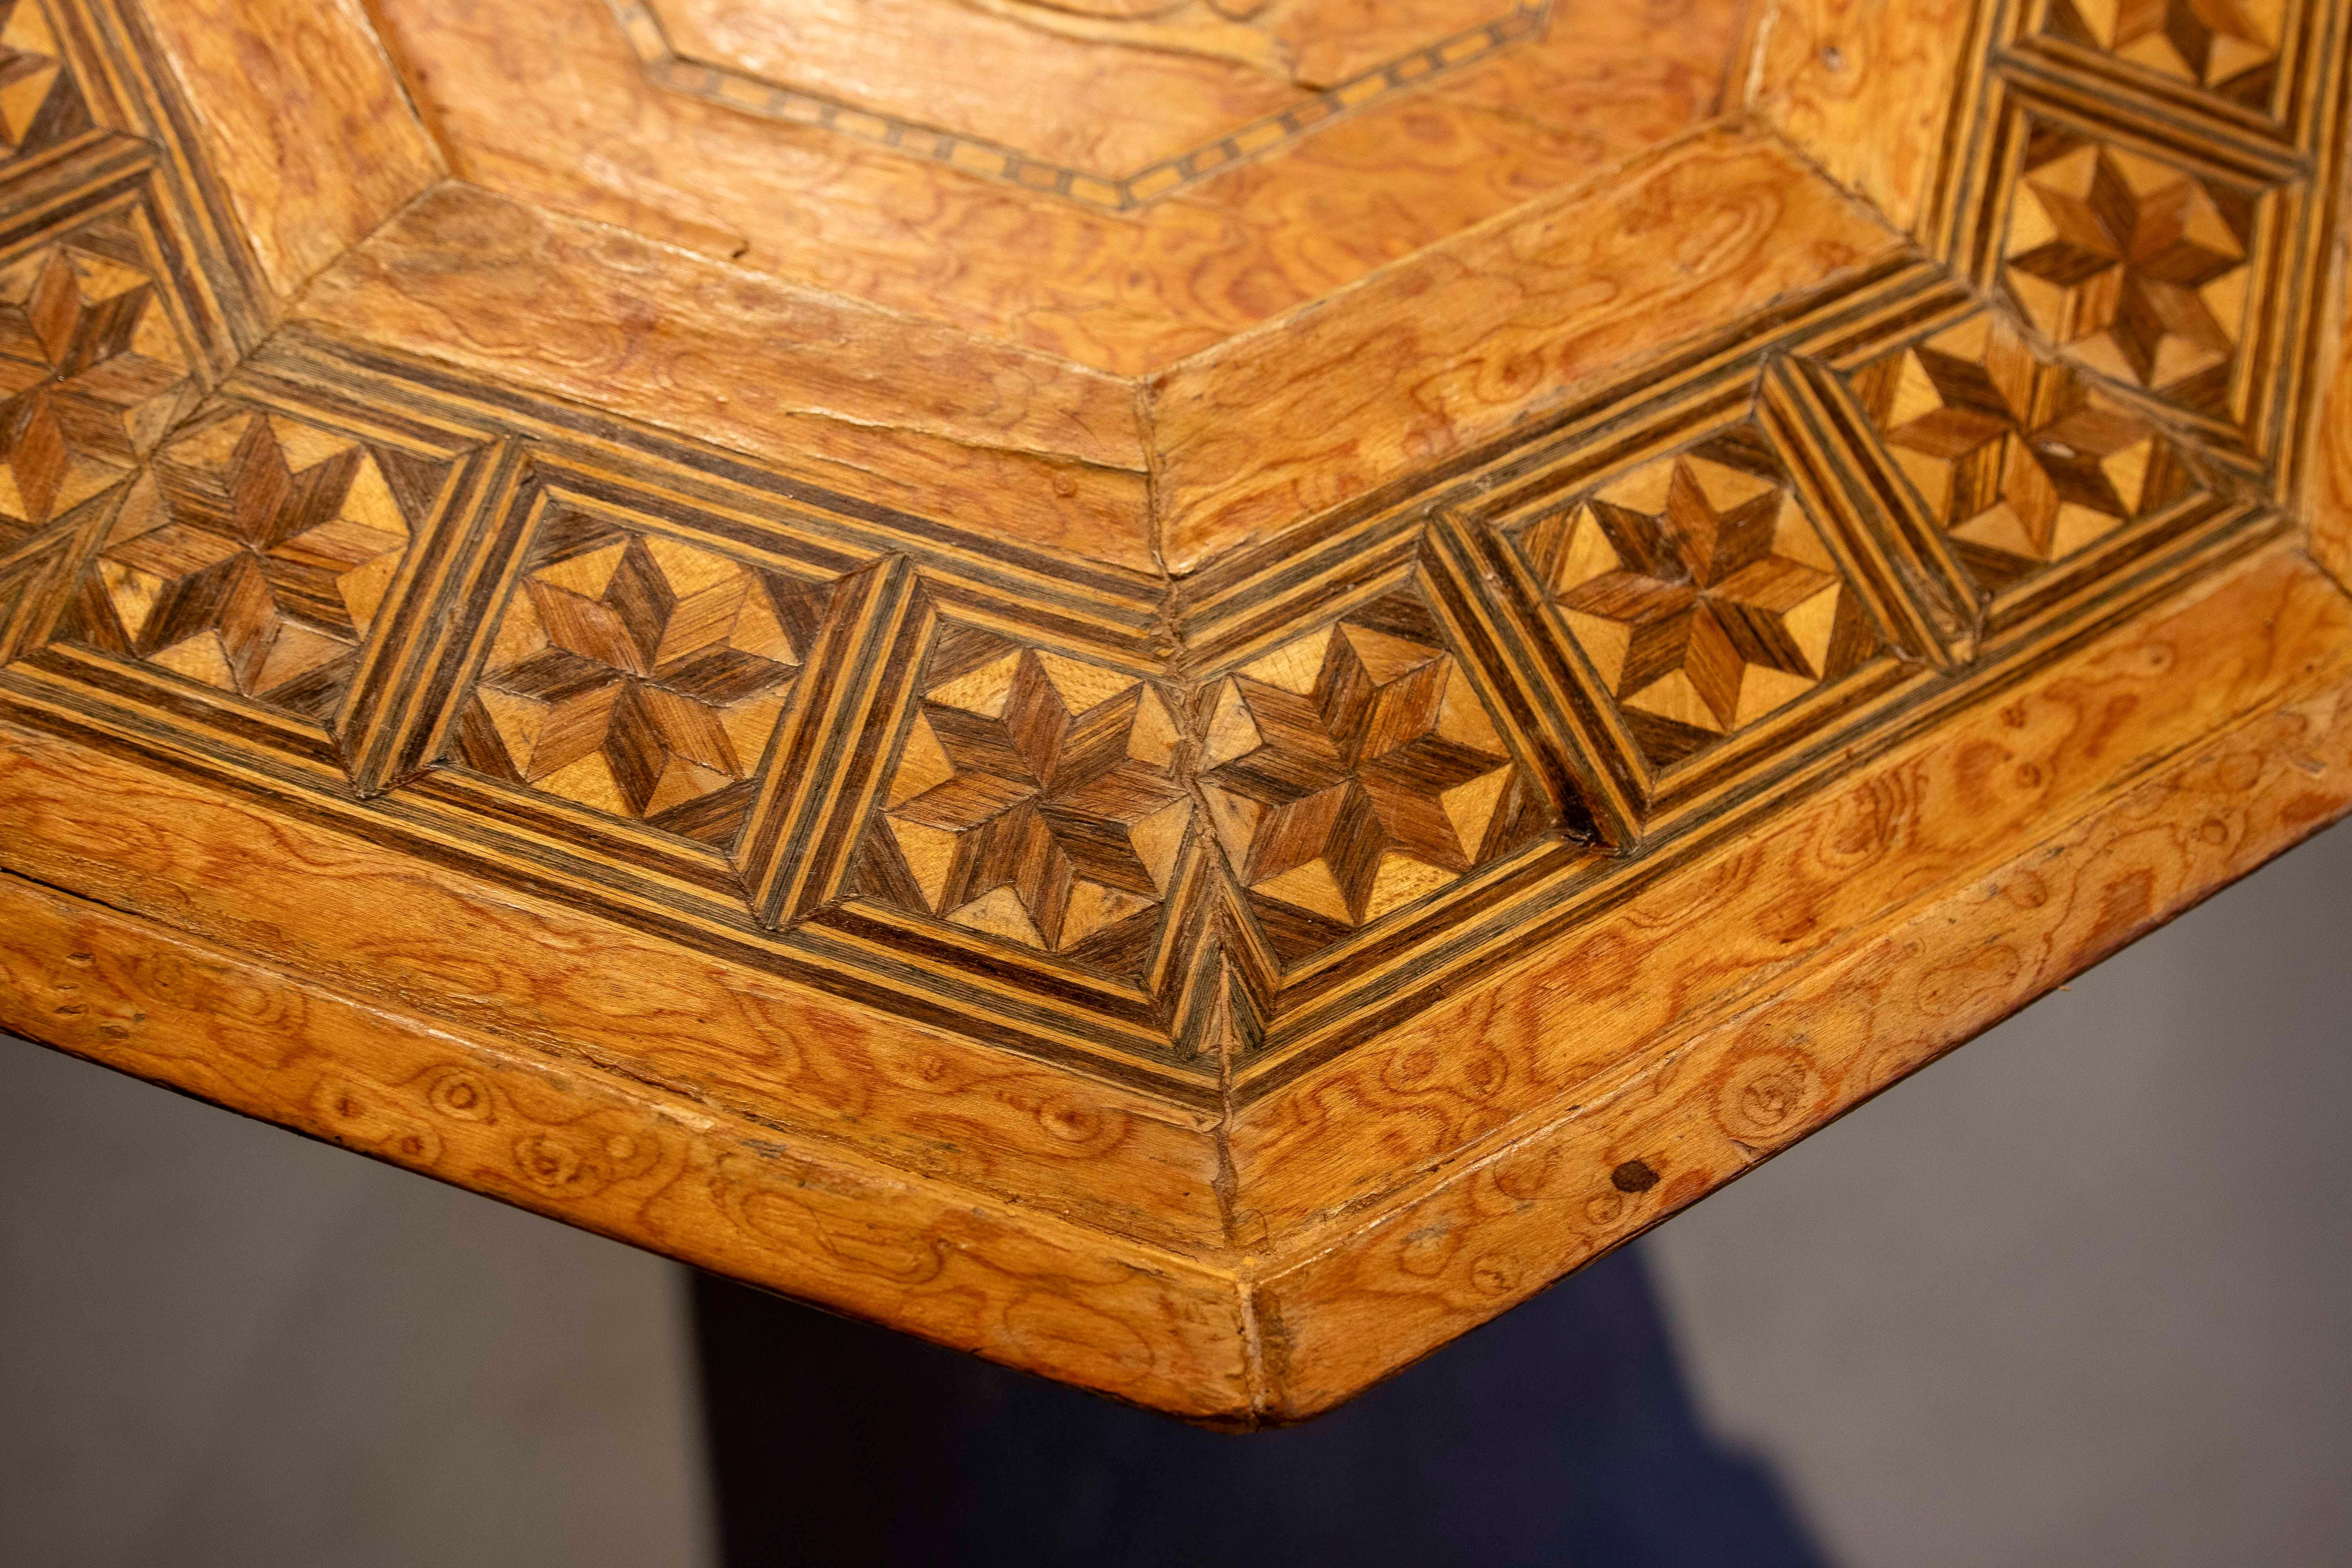  1980s Octagonal Wooden Table with Inlays 8